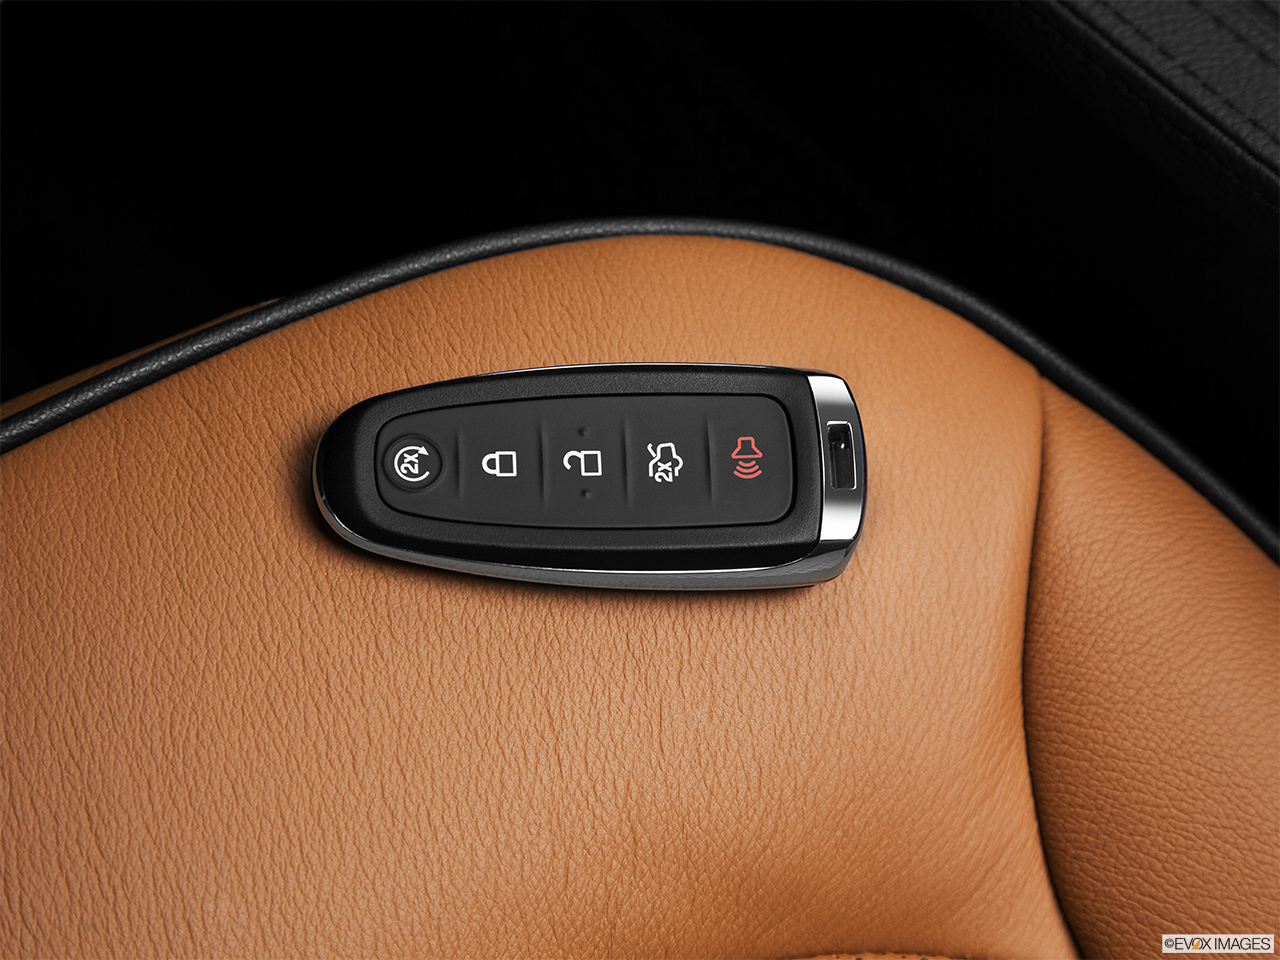 2013 Lincoln MKX FWD Key fob on driver's seat. 